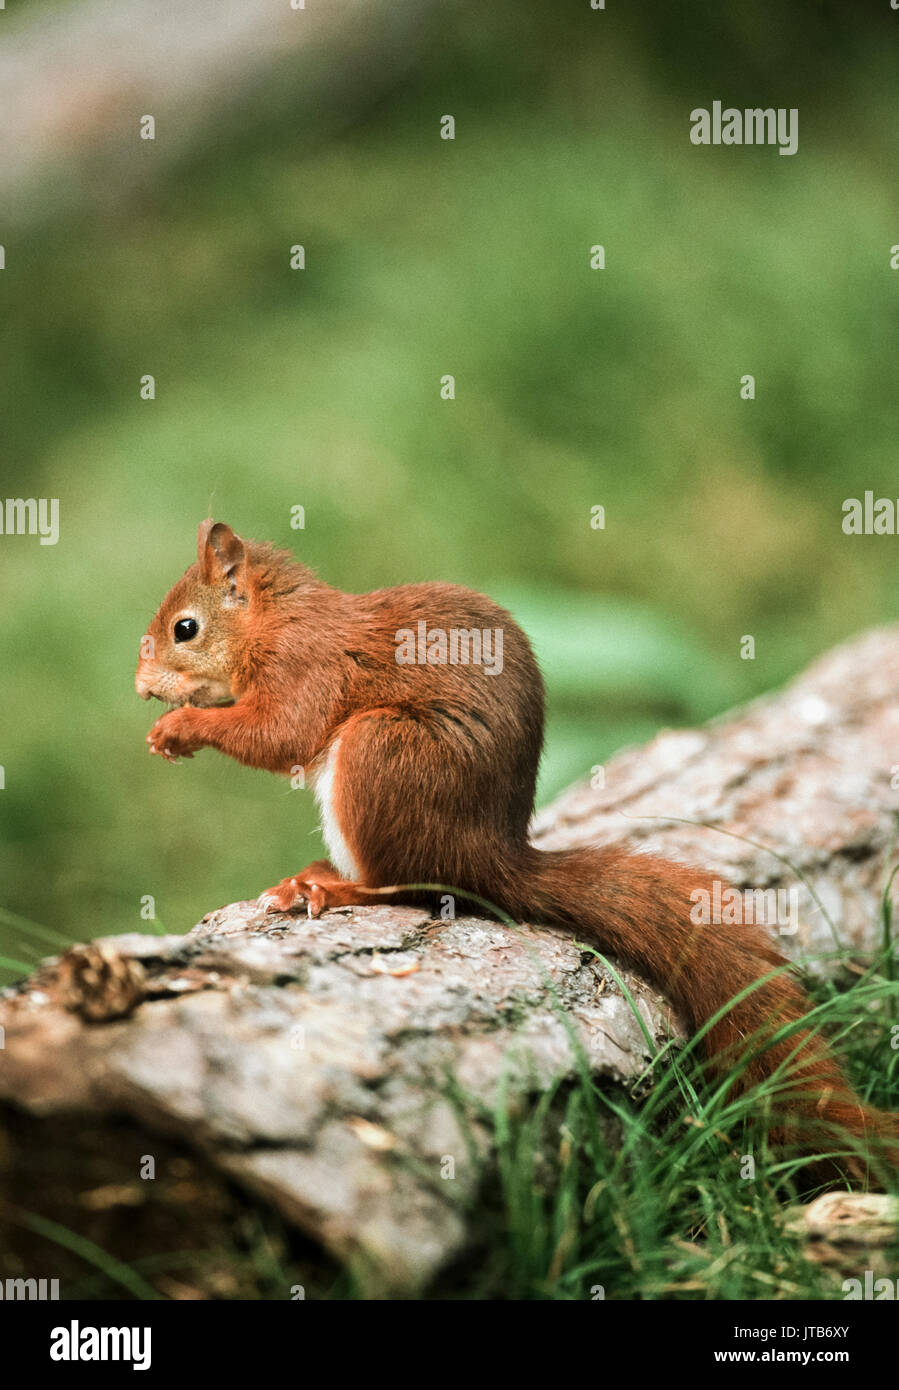 Red Squirrel or Eurasian Red Squirrel,(Sciurus vulgaris), sitting on a log eating, Formby National Trust Reserve, Liverpool,Merseyside, United Kingdom Stock Photo